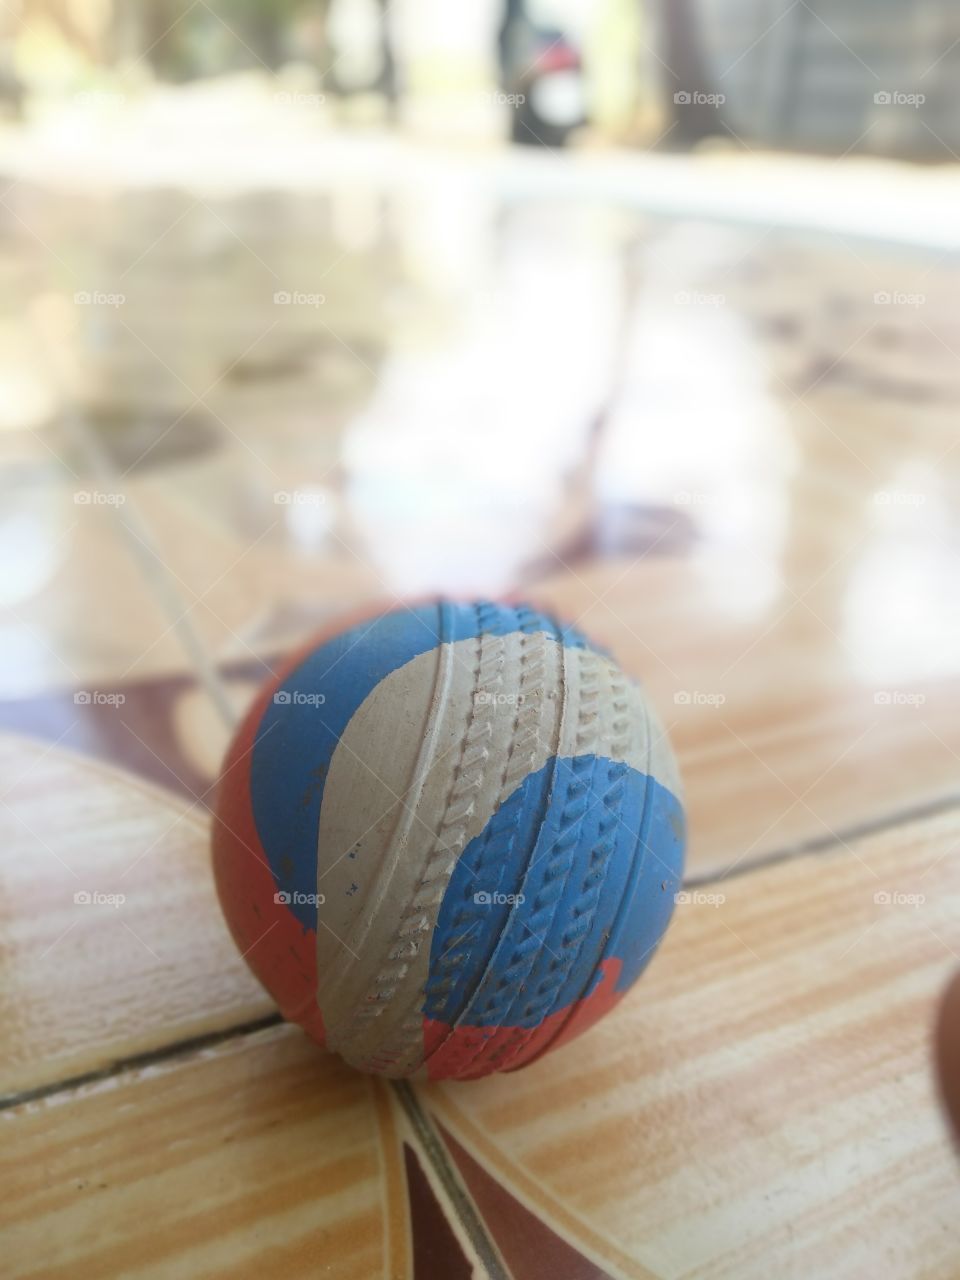 we play this pepsi ball in my younger age #pepsi #pepsico #ball #cricket #cricketball #cricketer #floor